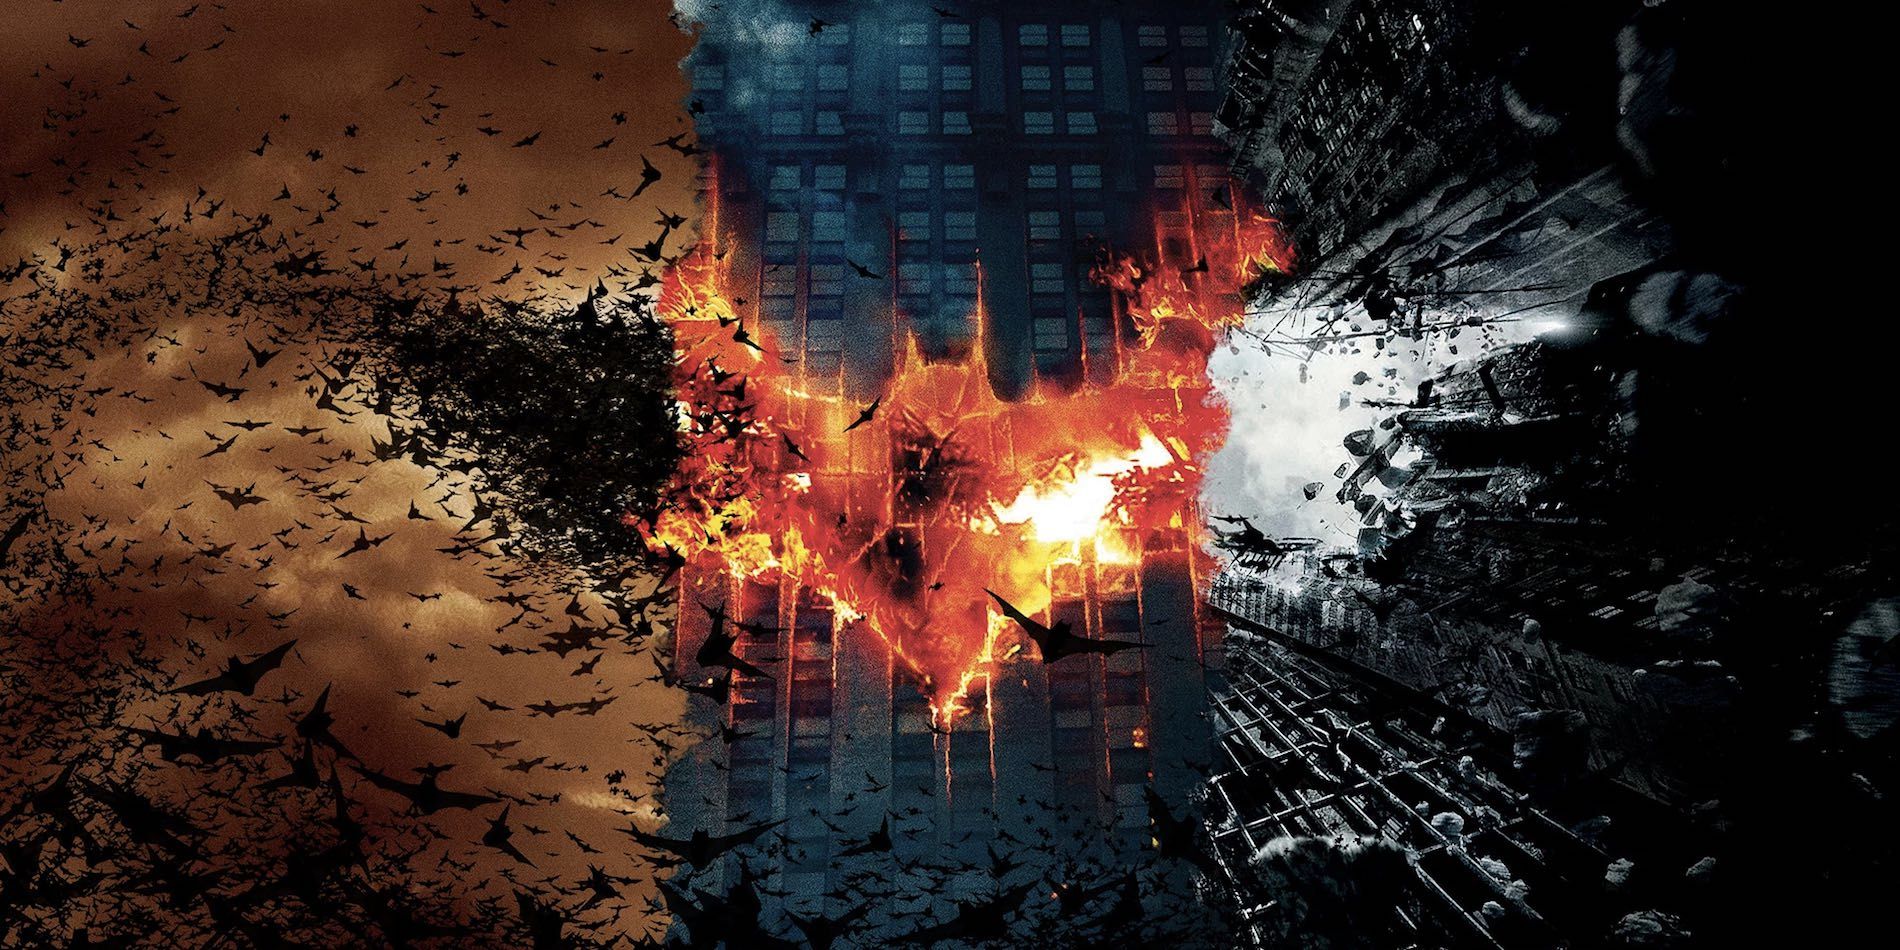 The Dark Knight Trilogy 10 Questions We Still Want Answered